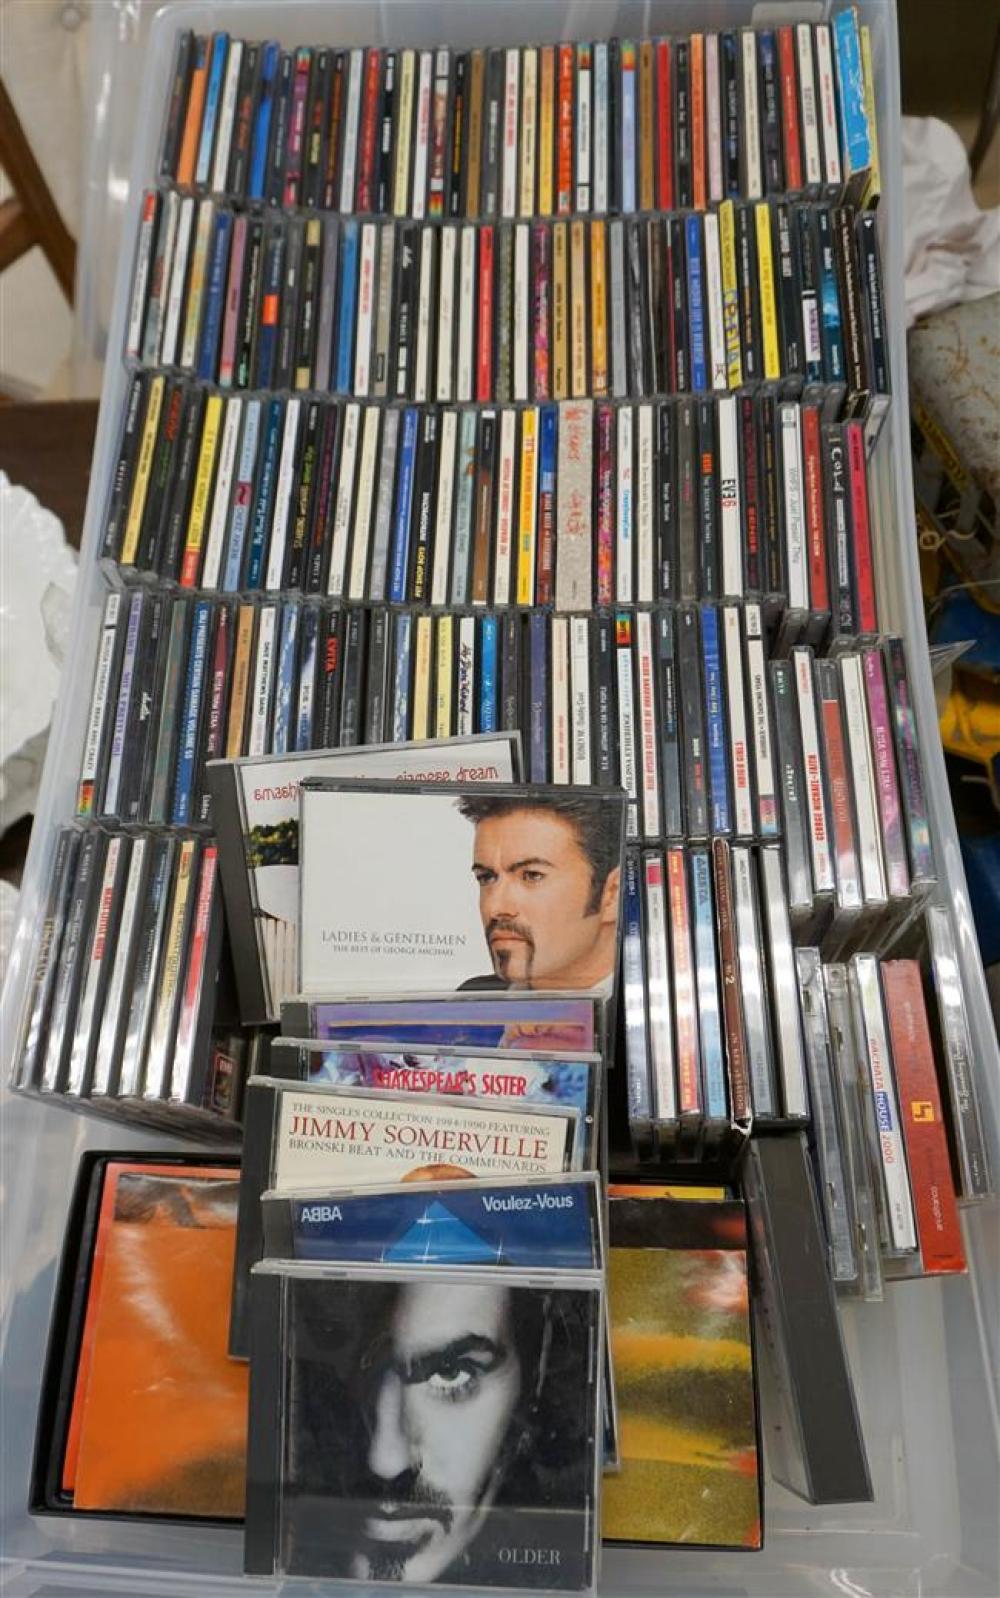 COLLECTION OF CDSCollection of CDs,